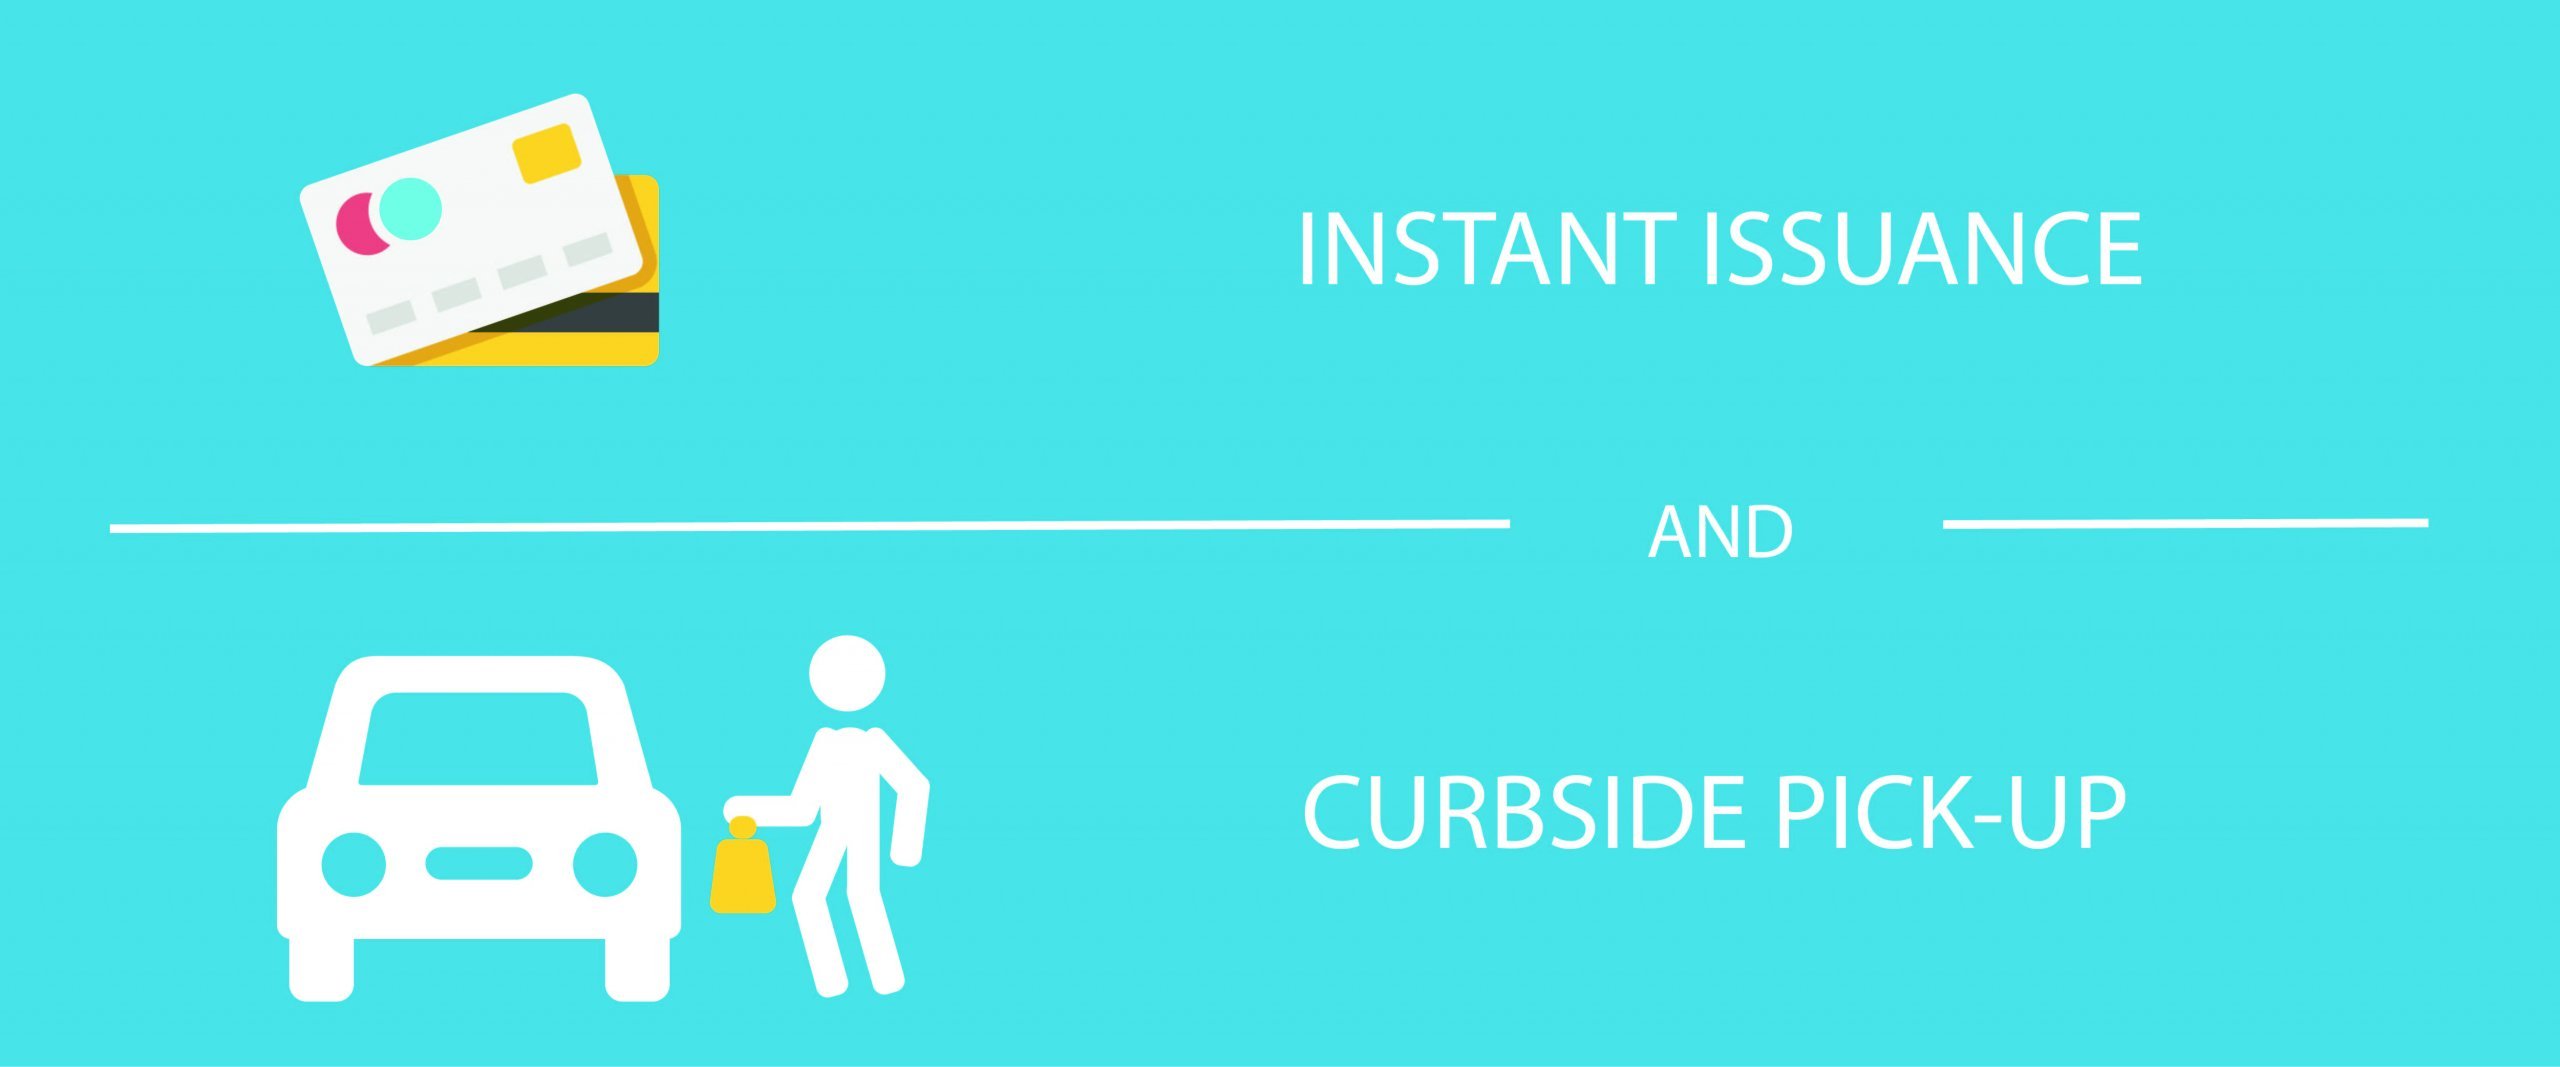 Instant Issuance-Curbside Pickup